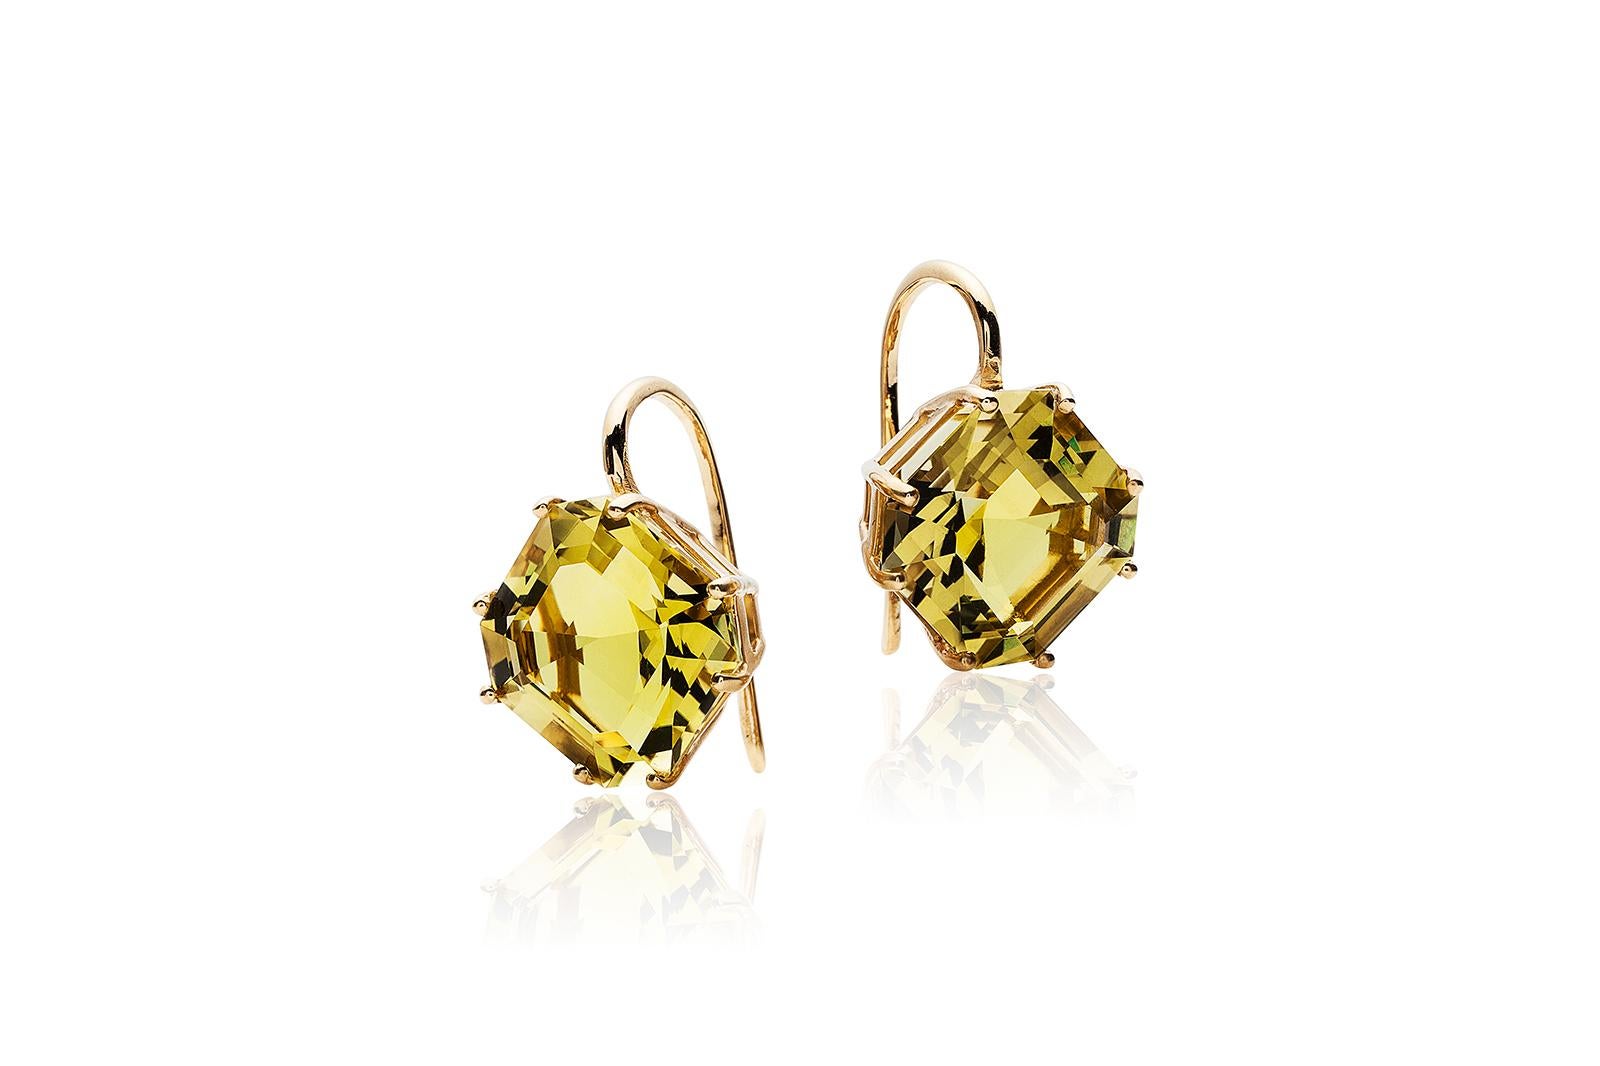 Lemon Quartz Square Emerald Cut Earrings on French Wire in 18K Yellow Gold from 'Gossip' Collection

Stone Size: 12 x 12 mm